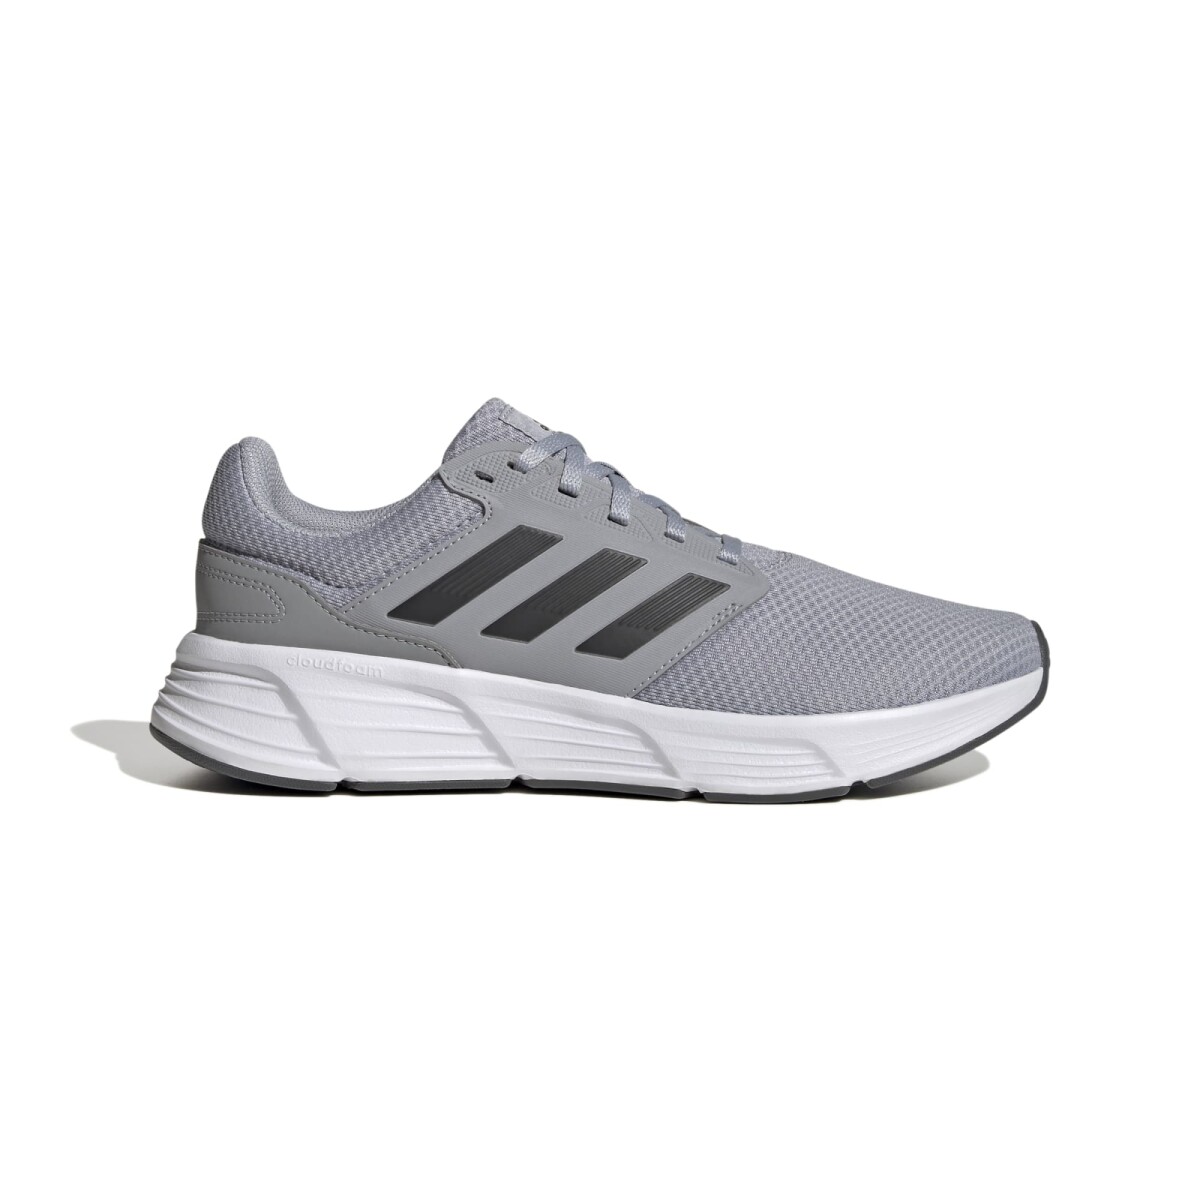 Championes Adidas Hombre Running - GALAXY 6 - ADGW4140 - SILVER/CARBON/FTWR WHITE 